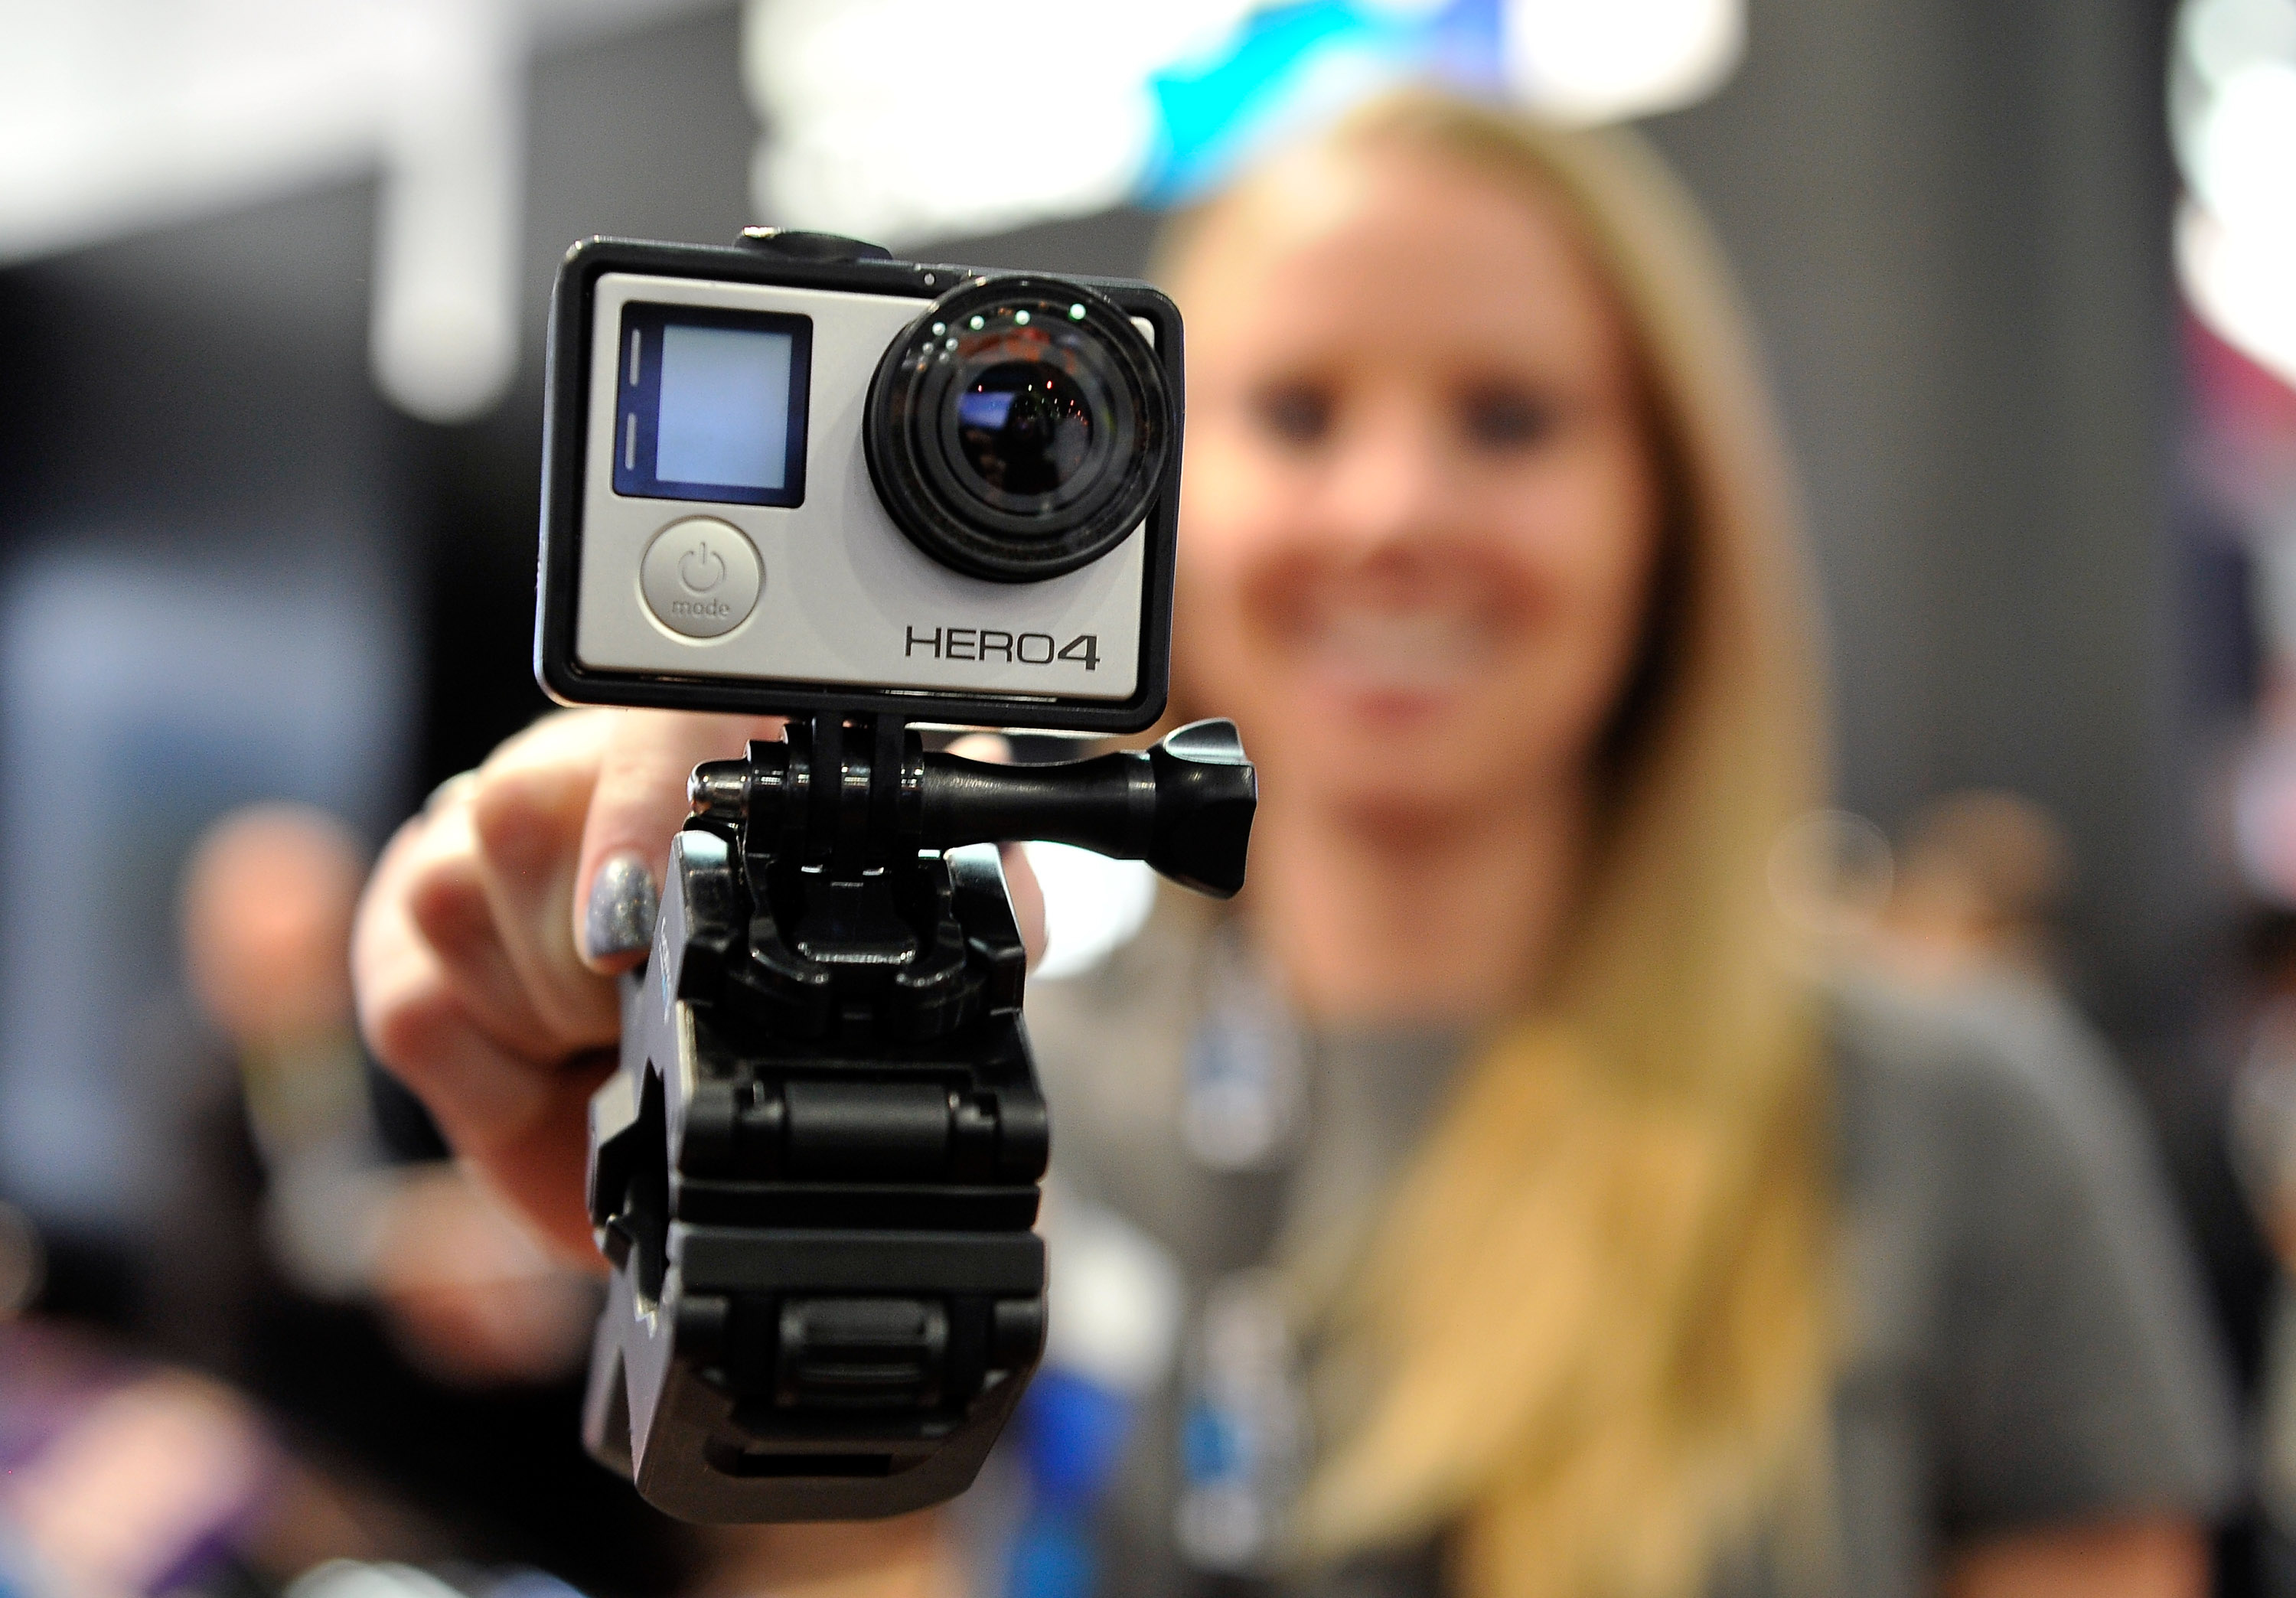 A GoPro Hero 4 camera is displayed at the 2015 International CES at the Las Vegas Convention Center on January 6, 2015 in Las Vegas, Nevada. (David Becker&mdash;Getty Images)